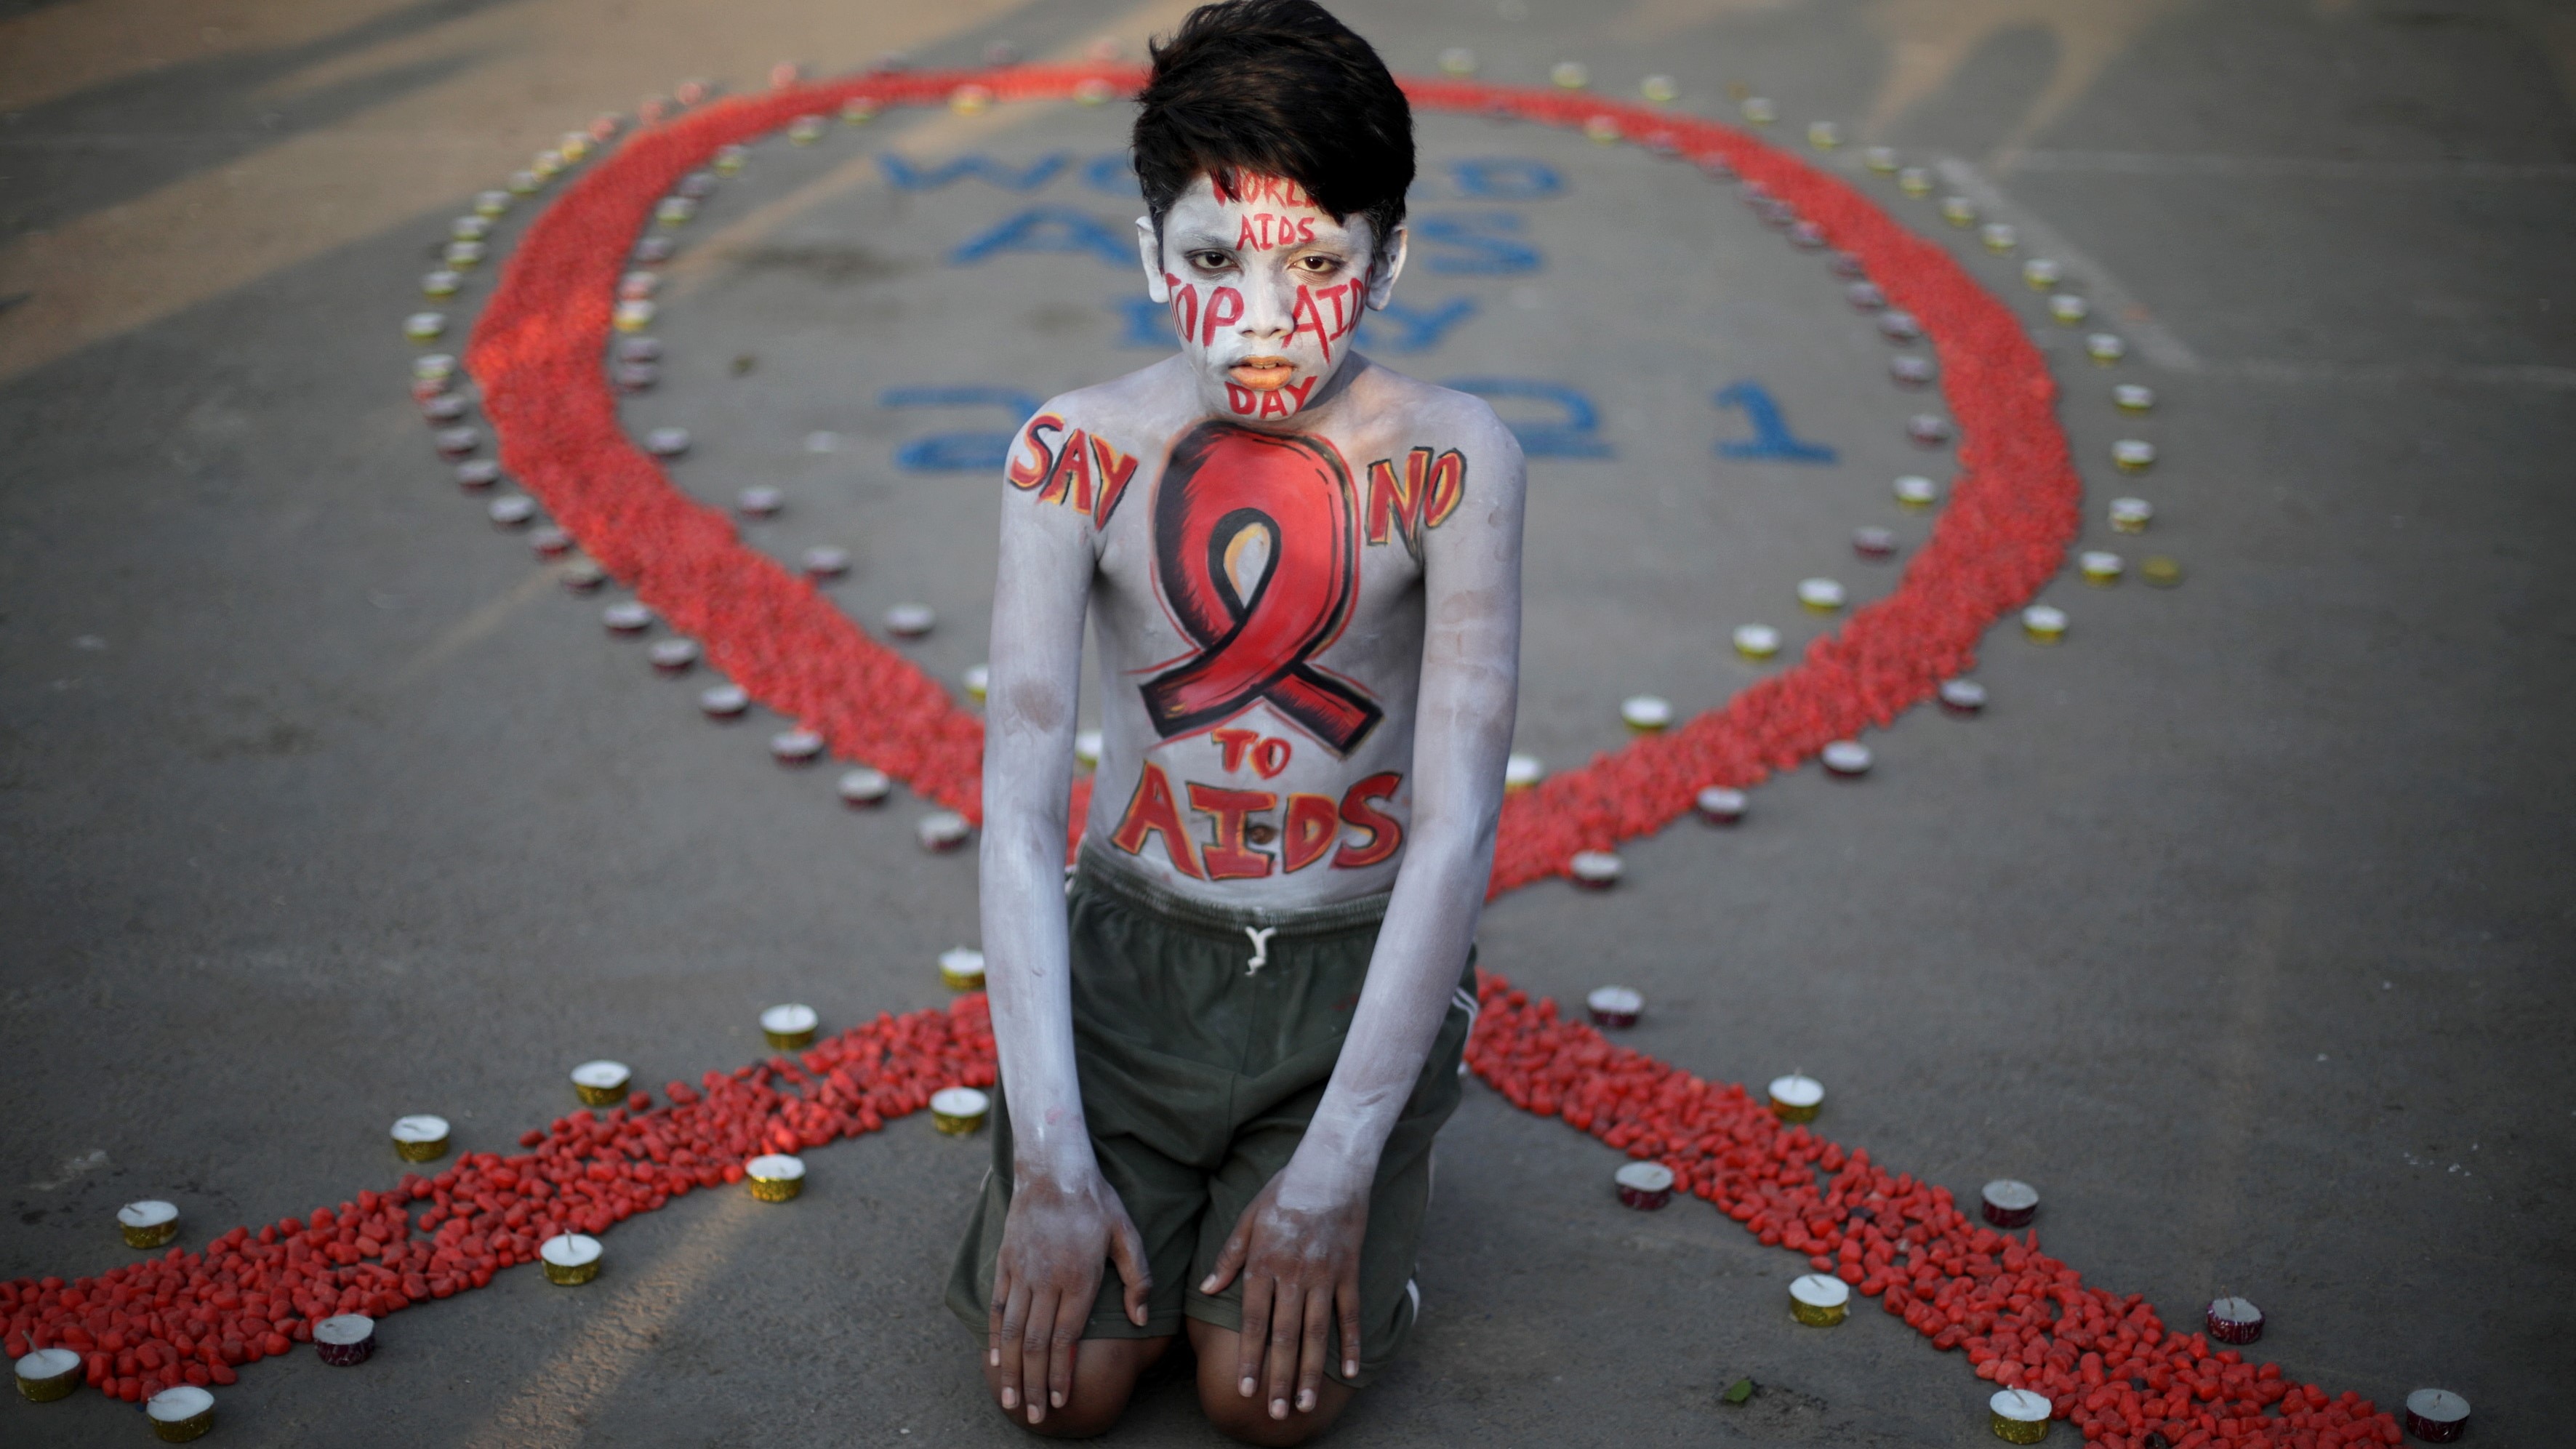 An activist poses during a campaign to mark World AIDS Day in Kolkata, India, 1 December 2021